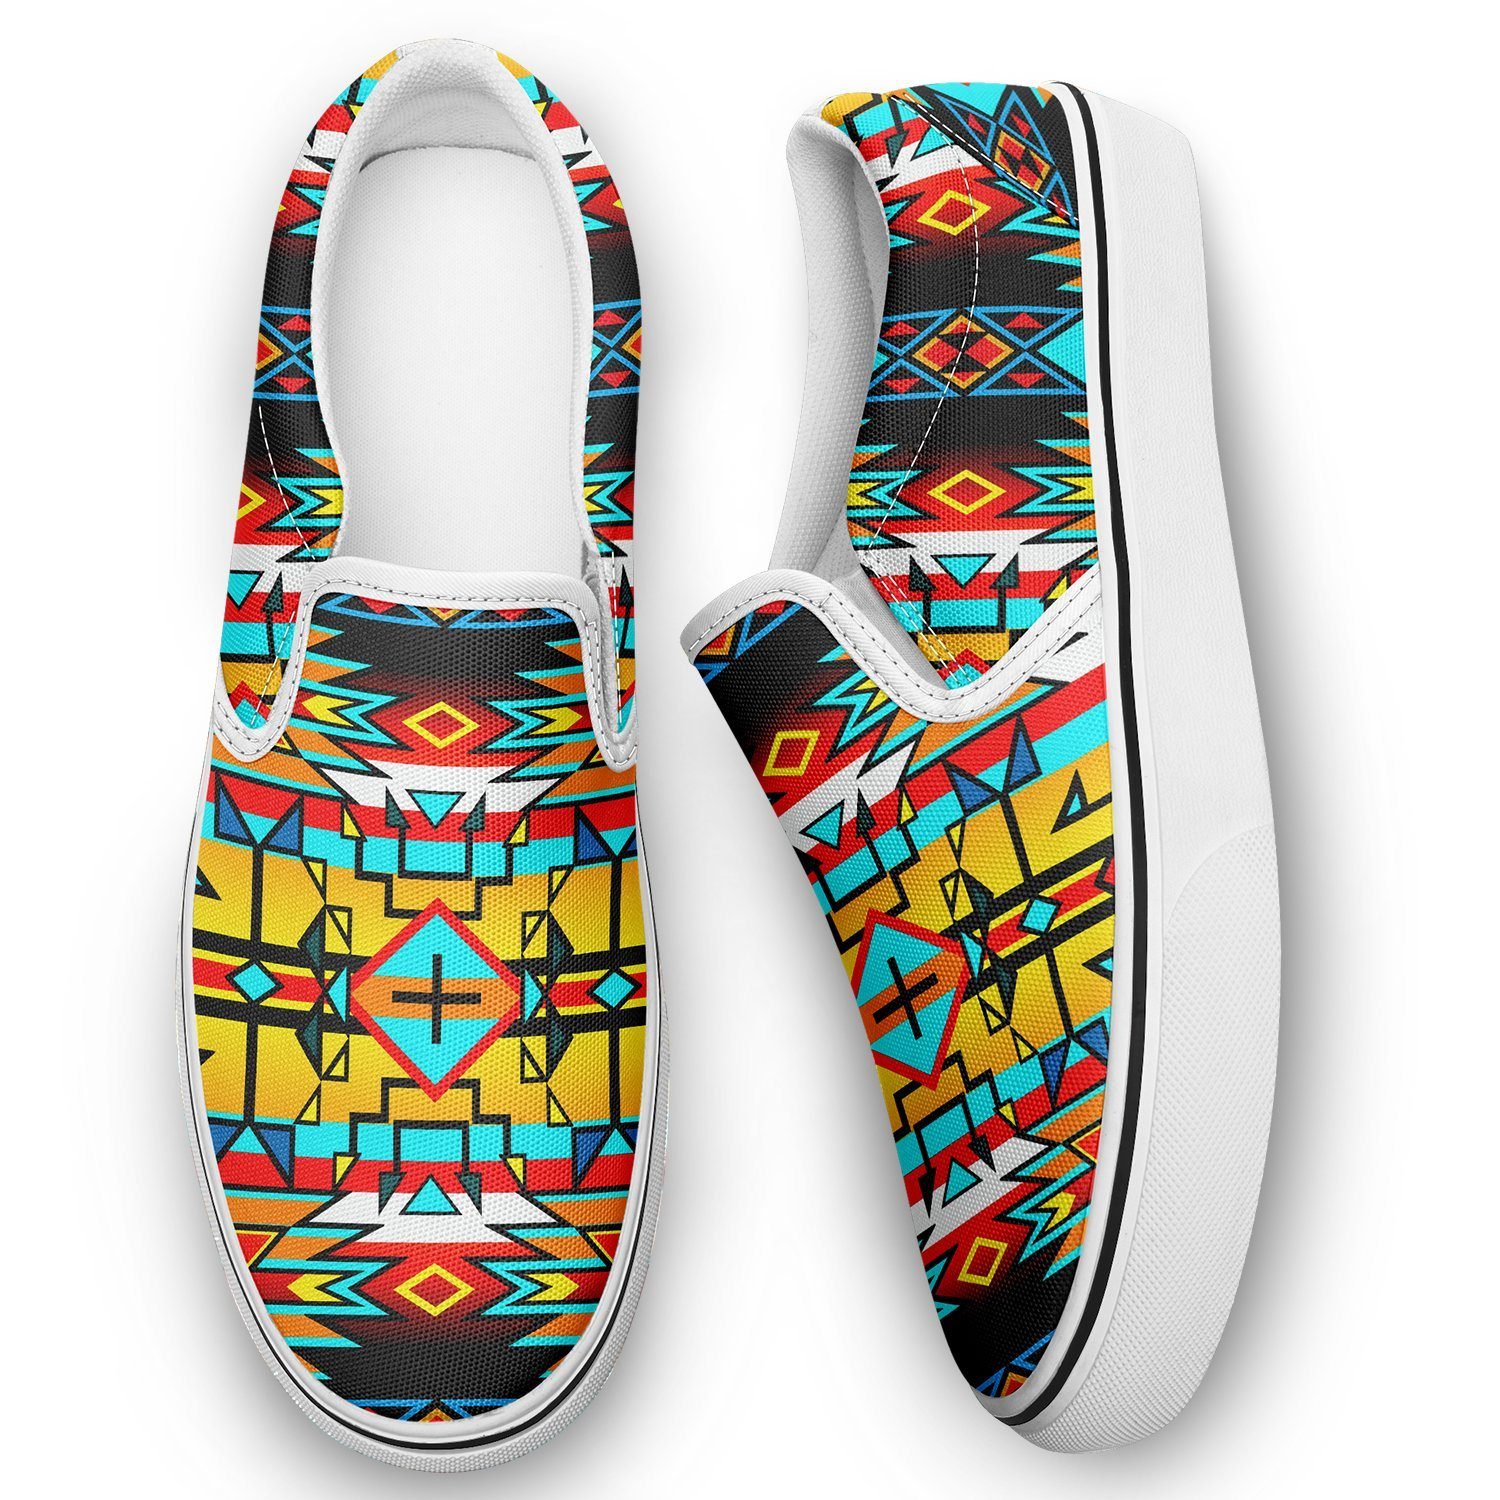 Force of Nature Twister Otoyimm Kid's Canvas Slip On Shoes 49 Dzine 